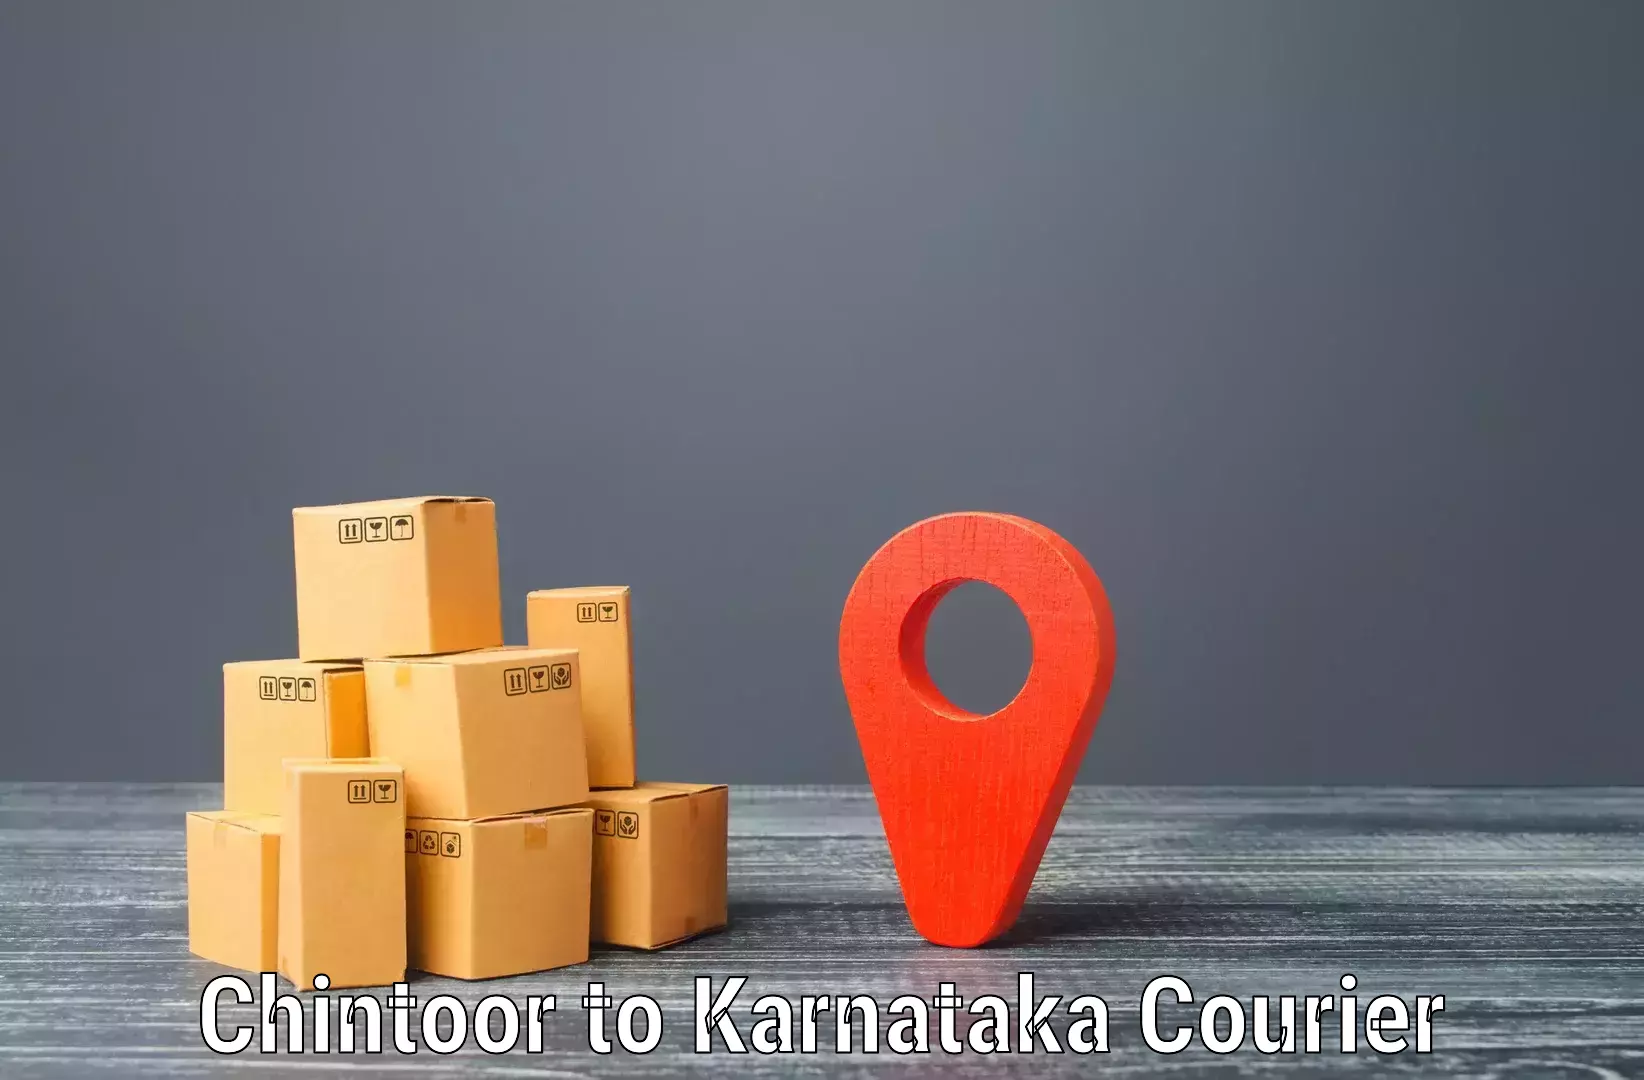 High-capacity parcel service Chintoor to Bethamangala